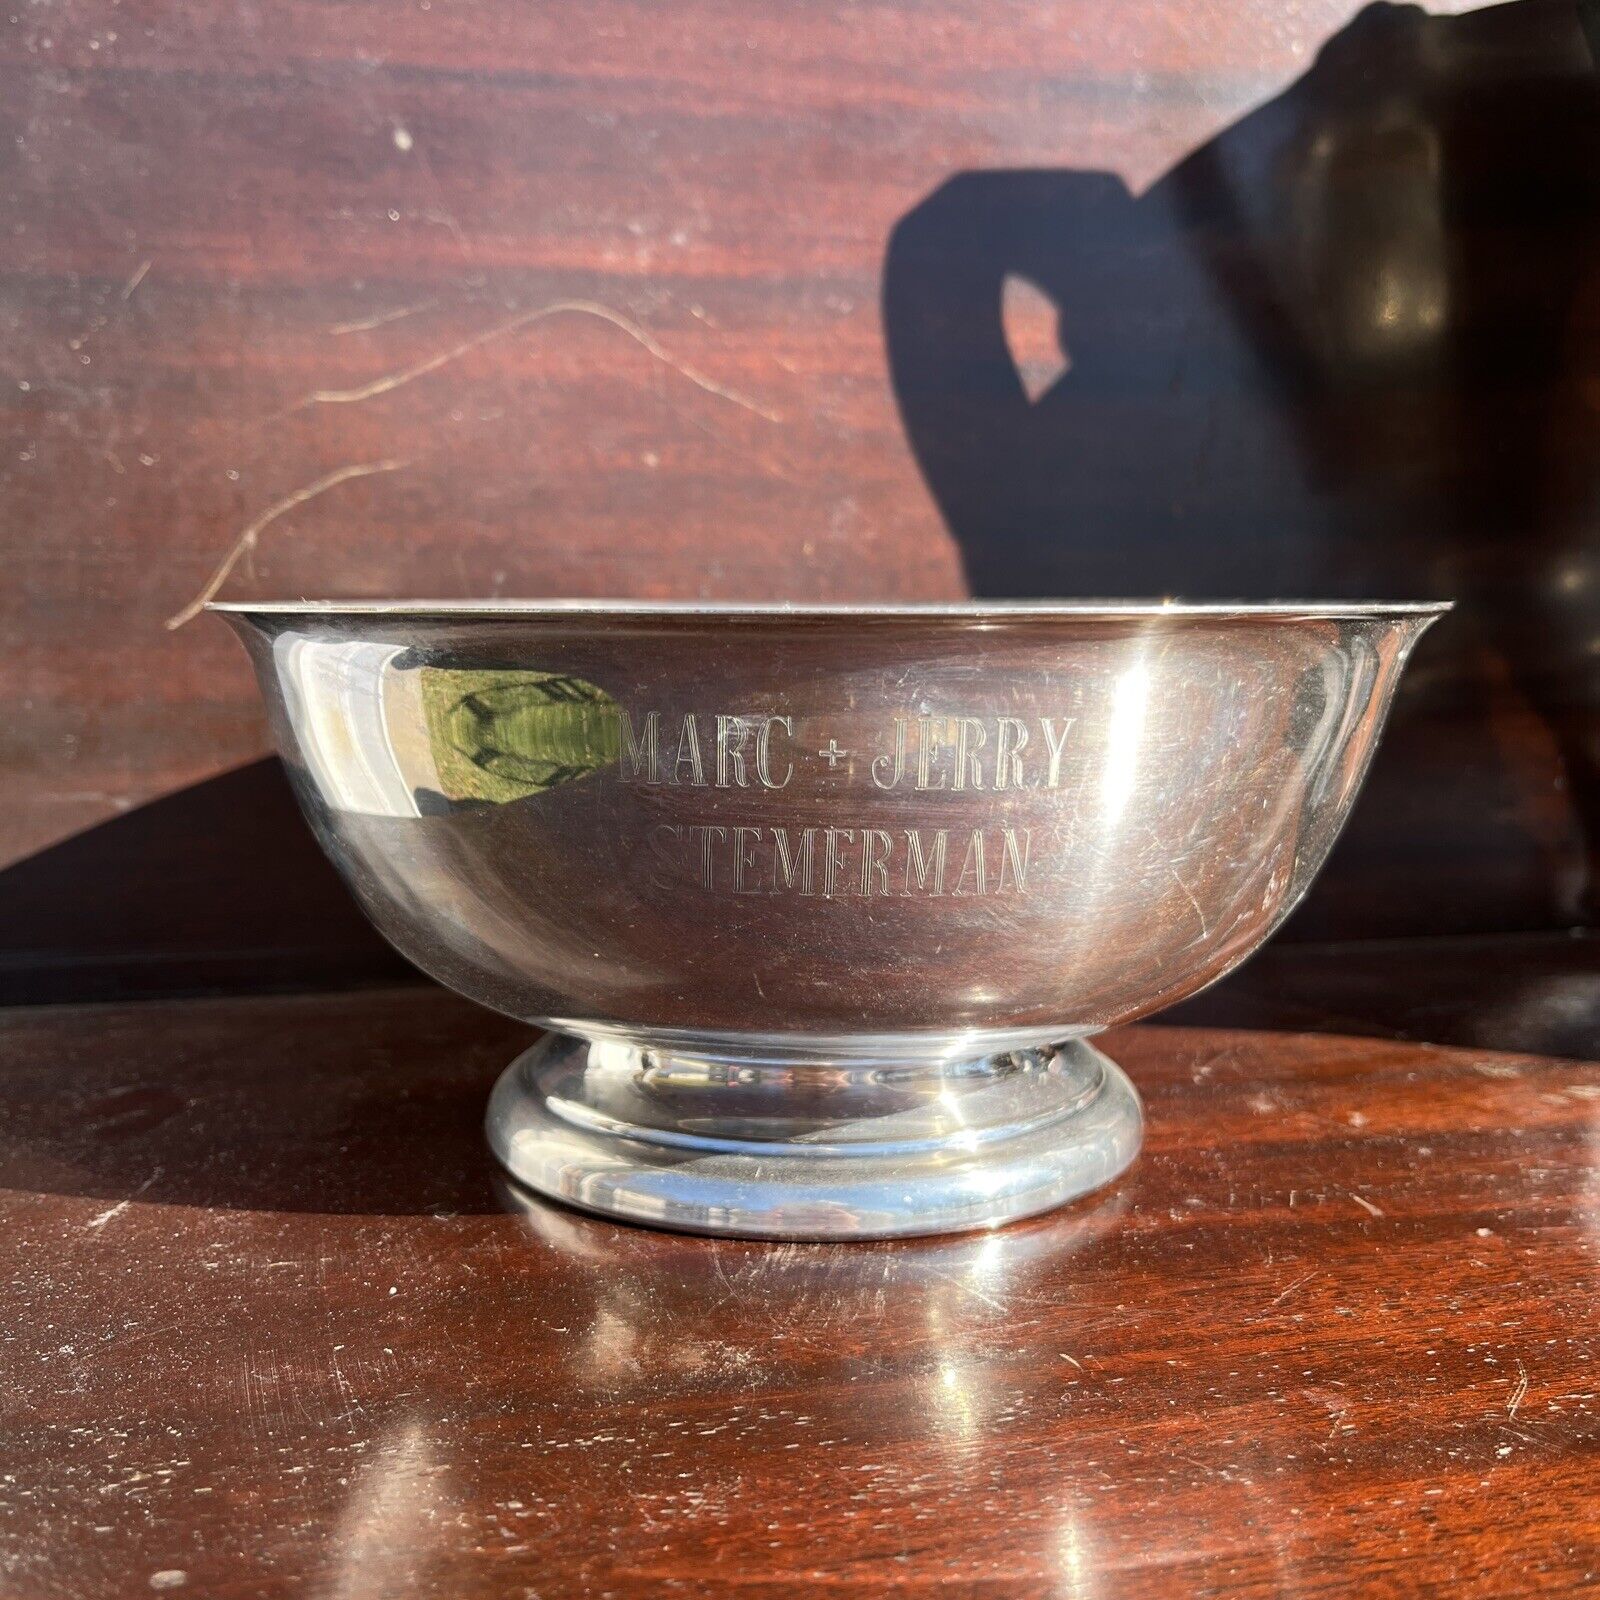 Sheridan Silver Plated Footed Bowl Monogram Marc & Jerry Stemerman 1989 Tour